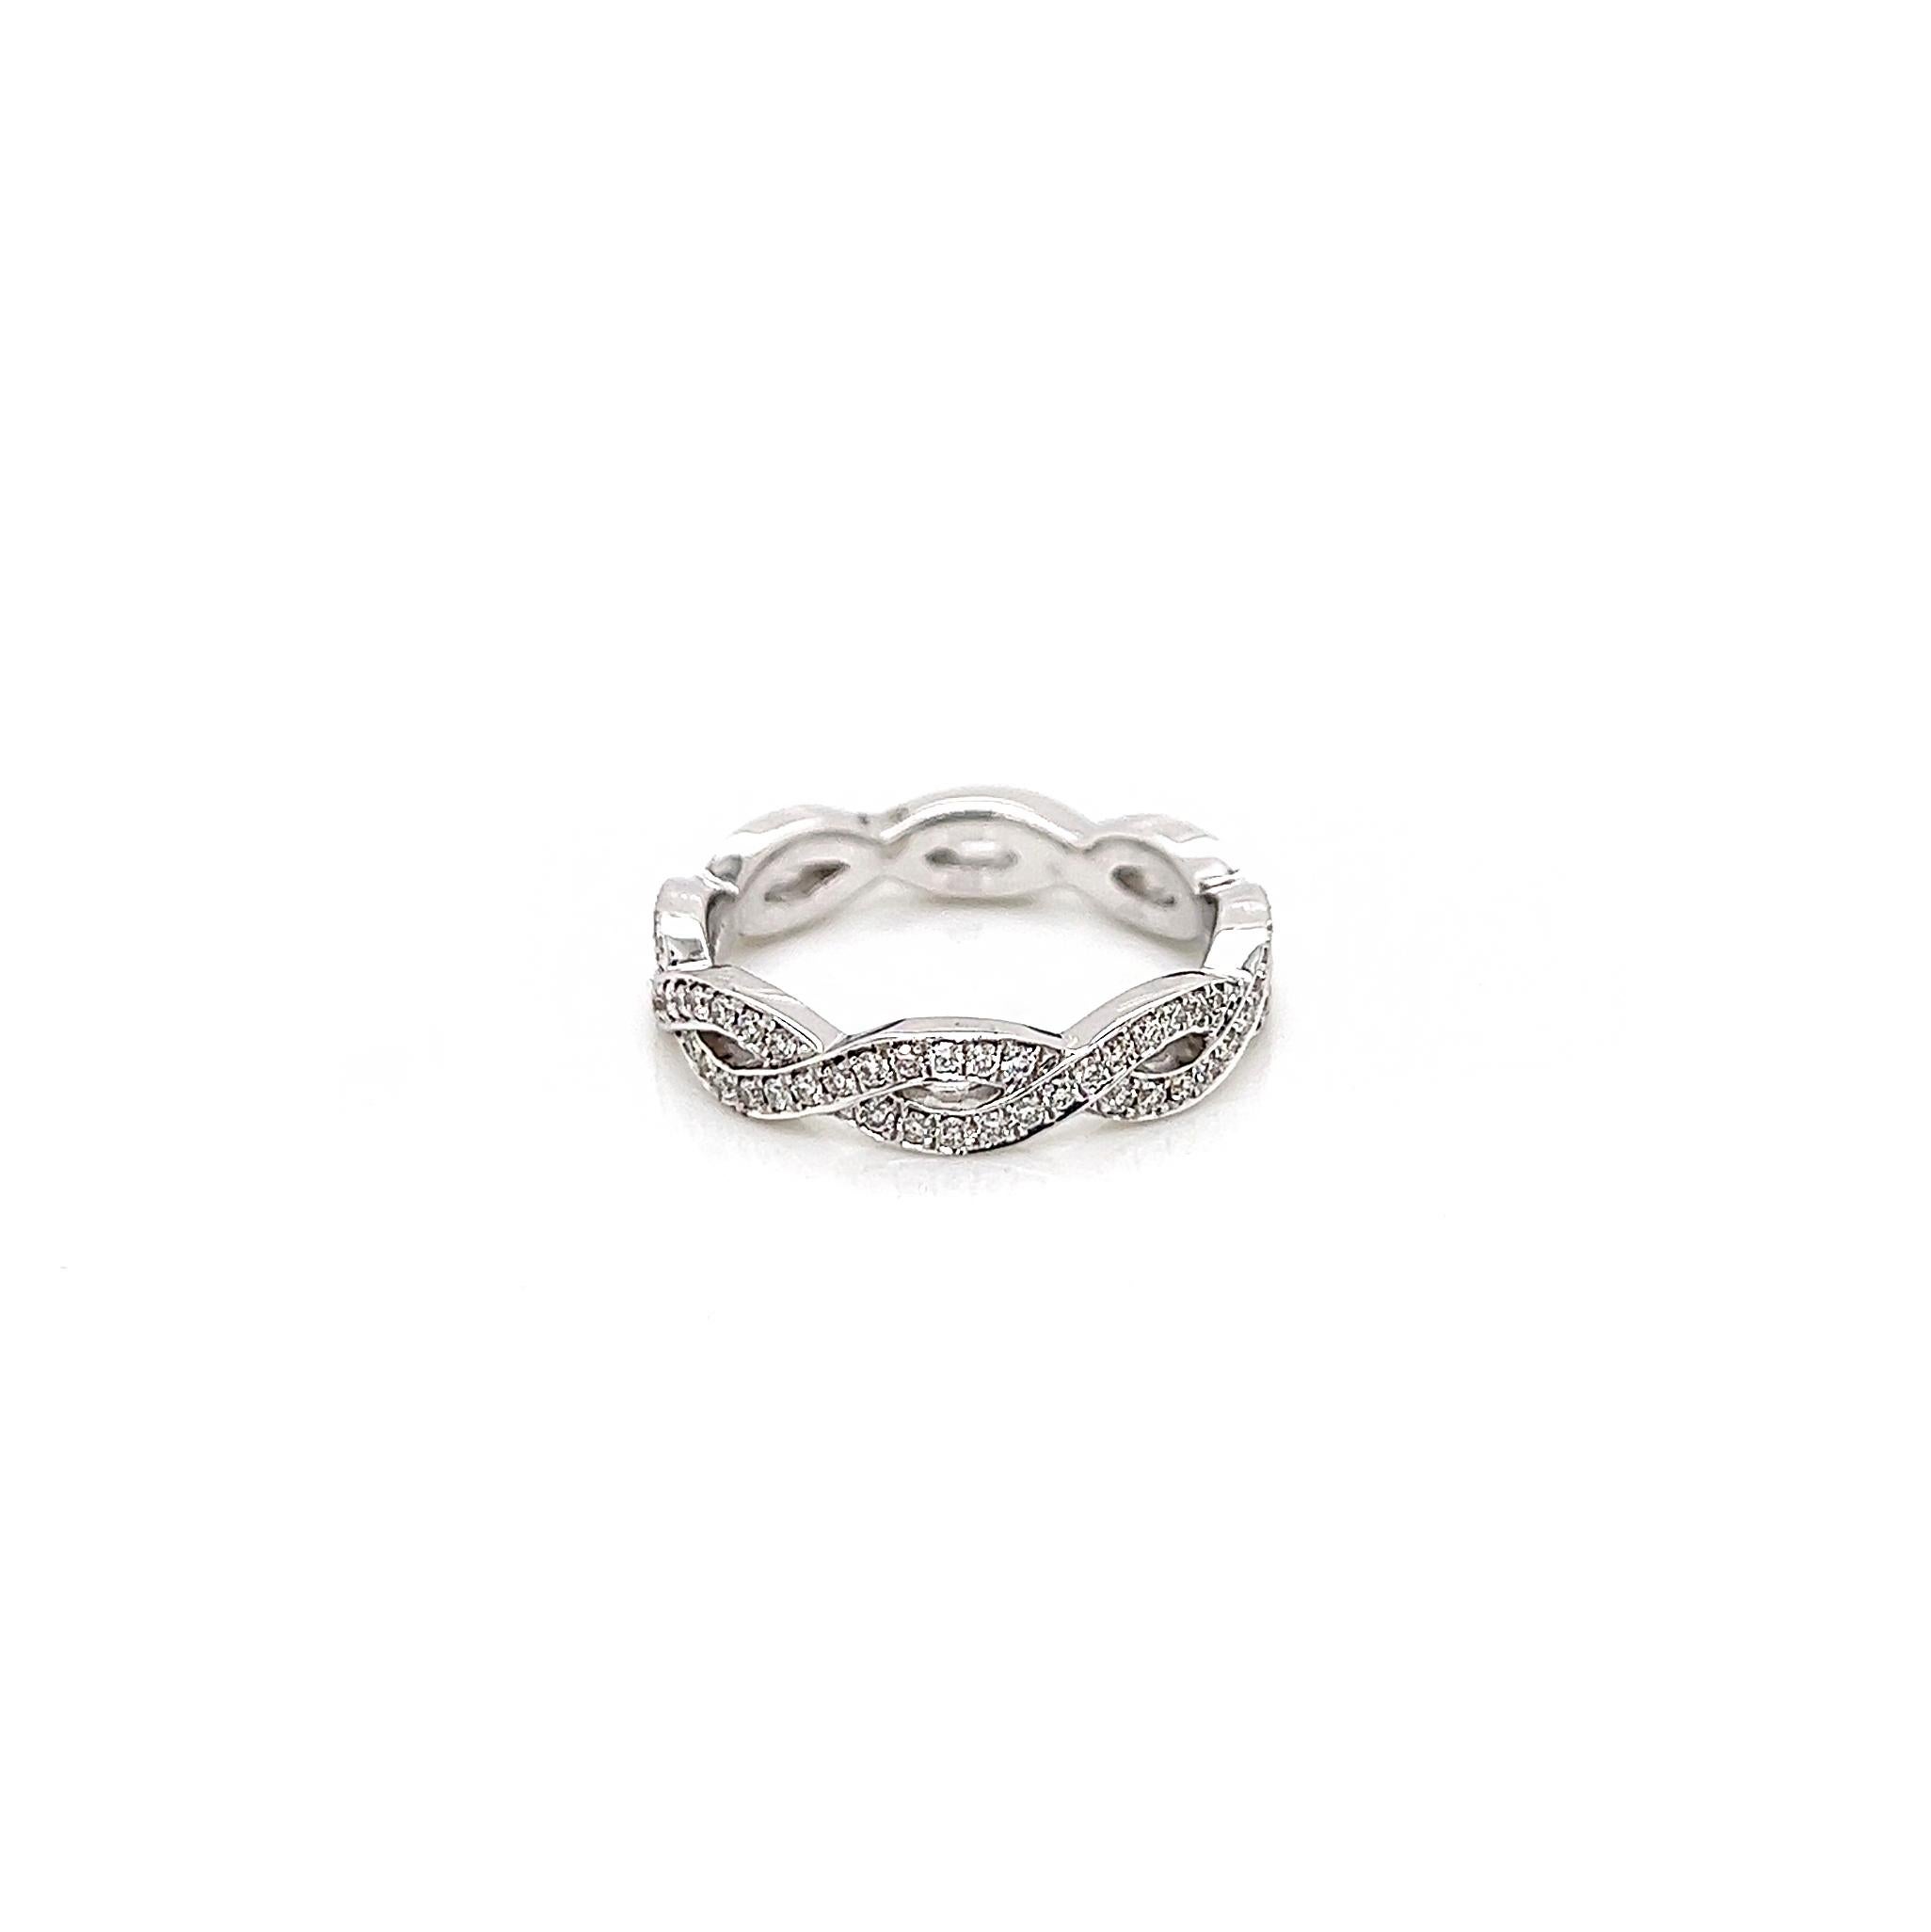 0.71Carat Ladies Pave-Set Diamond Eternity Band

-Metal Type: 18K White Gold
-0.71Carat Round Natural Diamonds
-F-G Color
-VS Clarity

-Size 6.75

Made in New York City